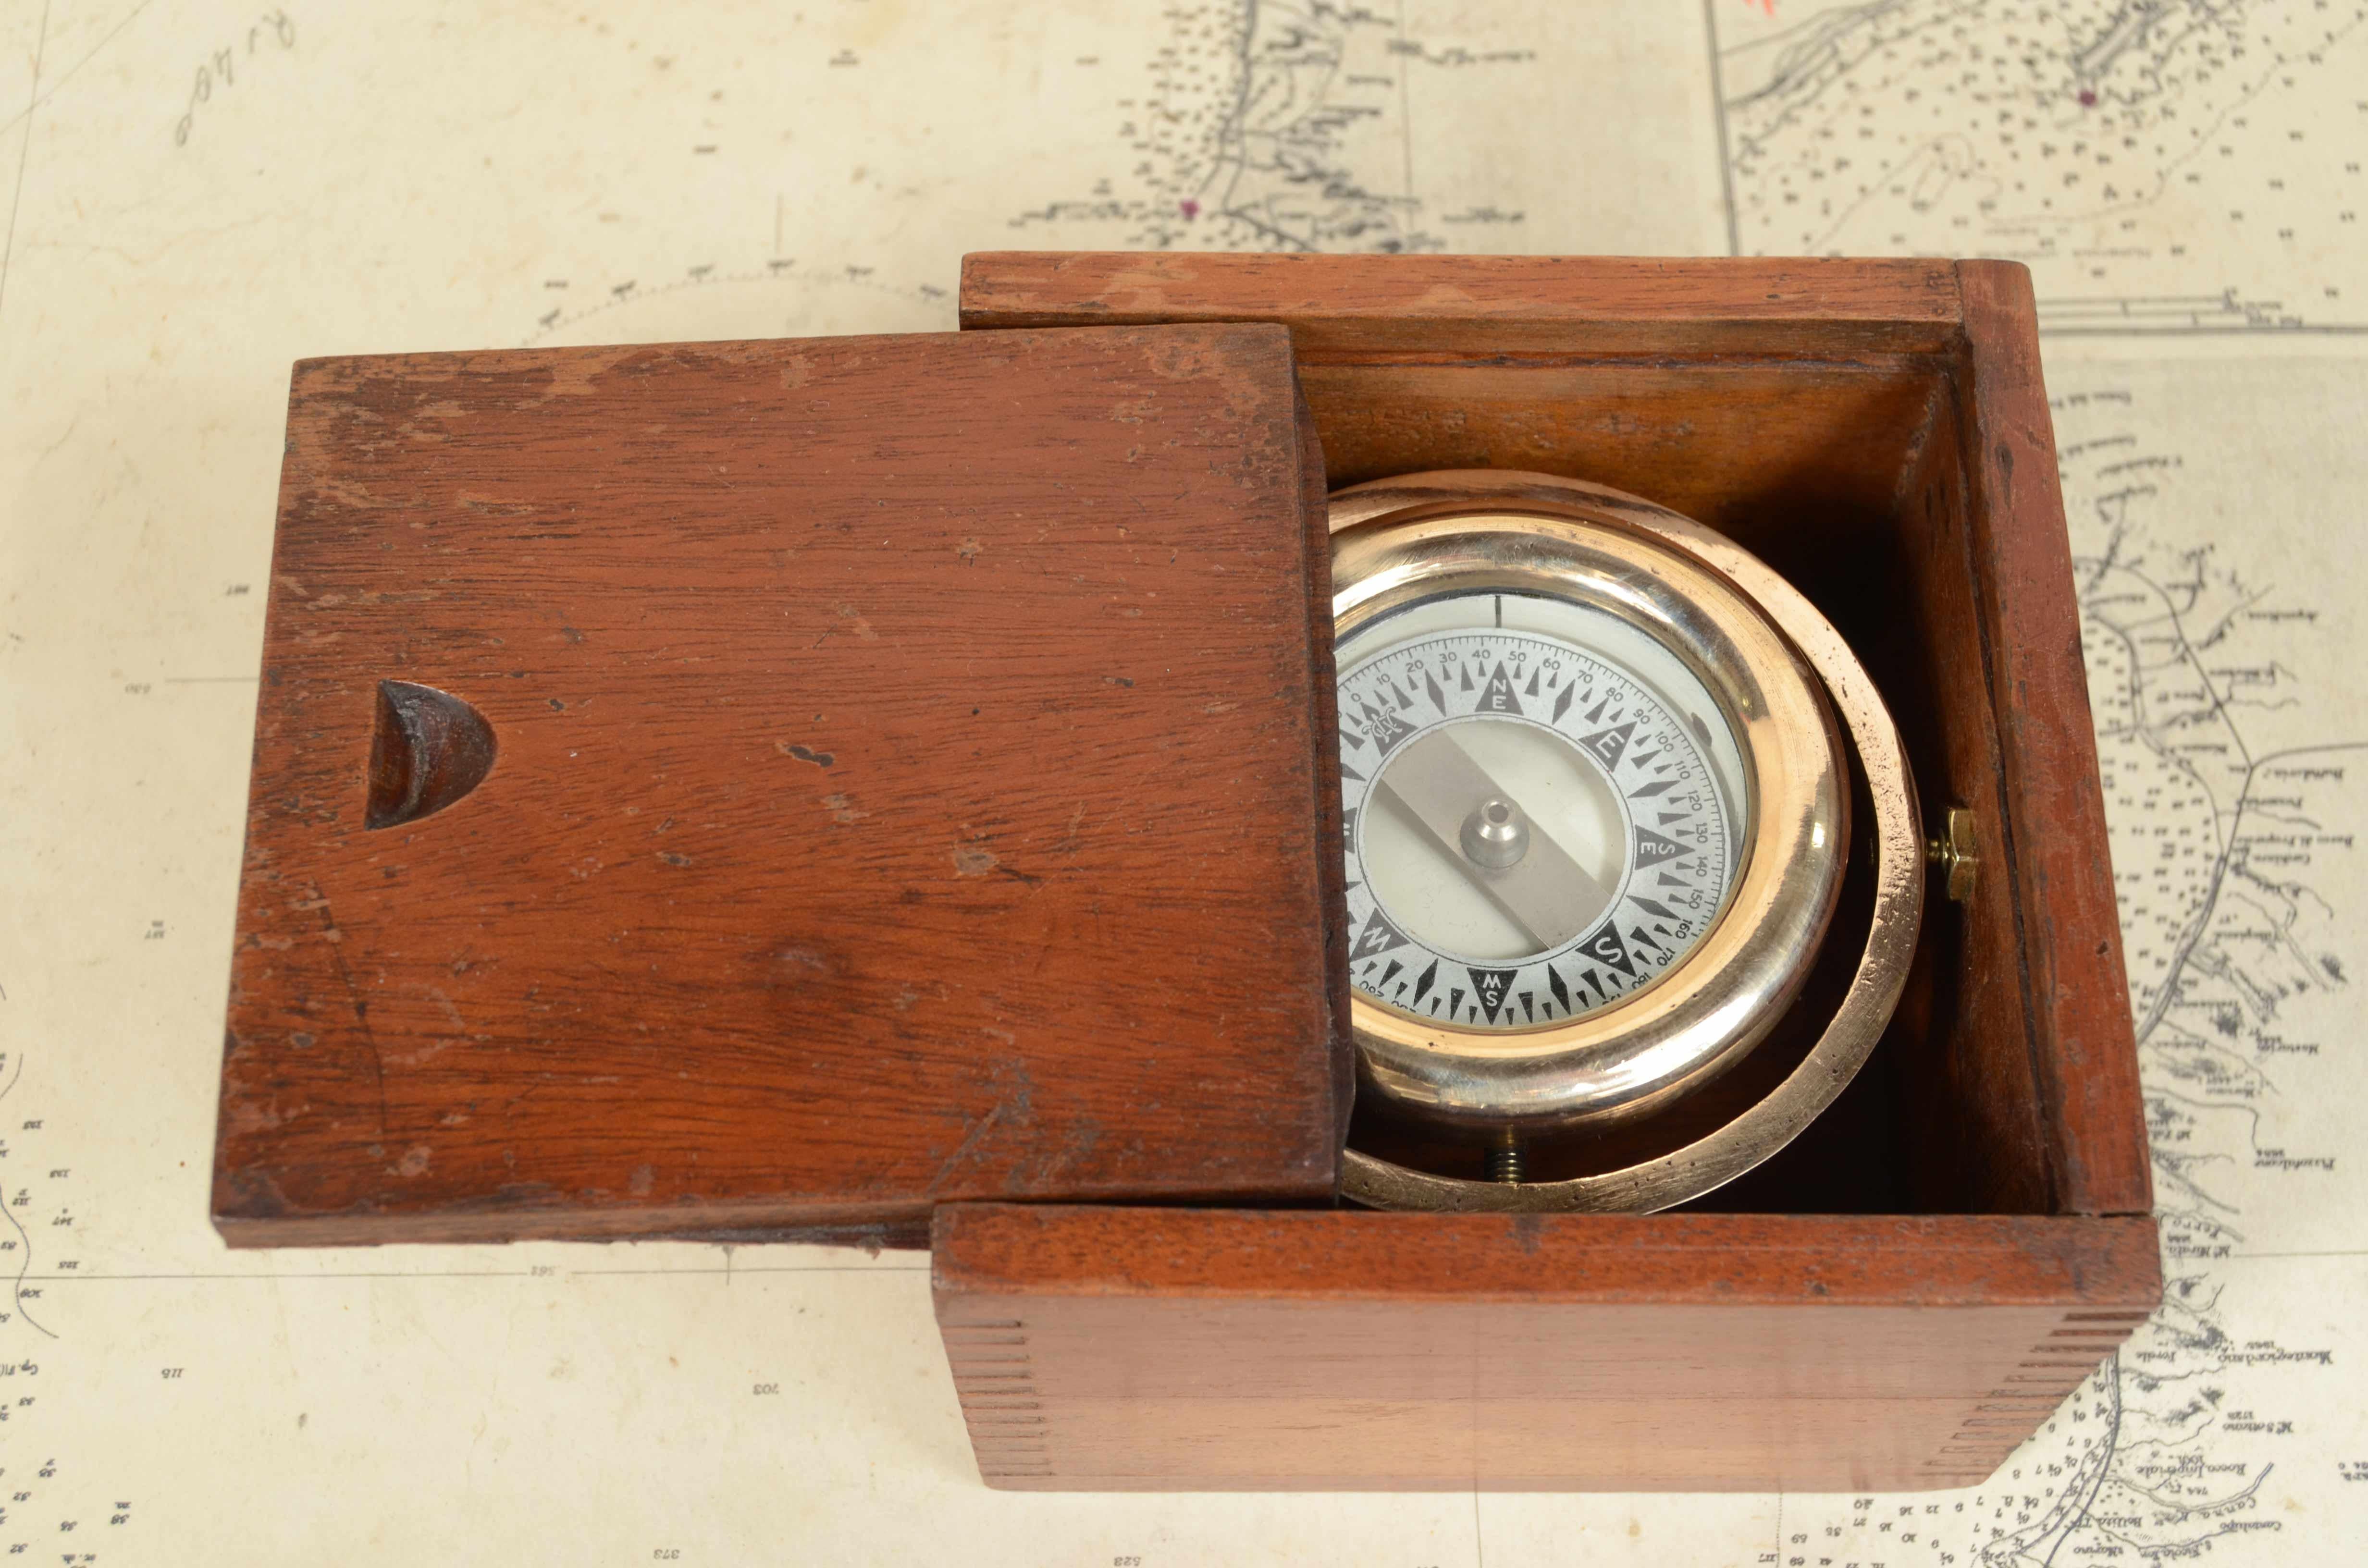 Nautical magnetic compass, made in the USA in the 1930s. 
Bon état. Housed in its original box with wooden slot lid and mounted on gimbal.
Box measures 12x12x8.5 cm - inches 4.8x4.8x3.4.Good condition signs of use on box. 
The compass consists of a